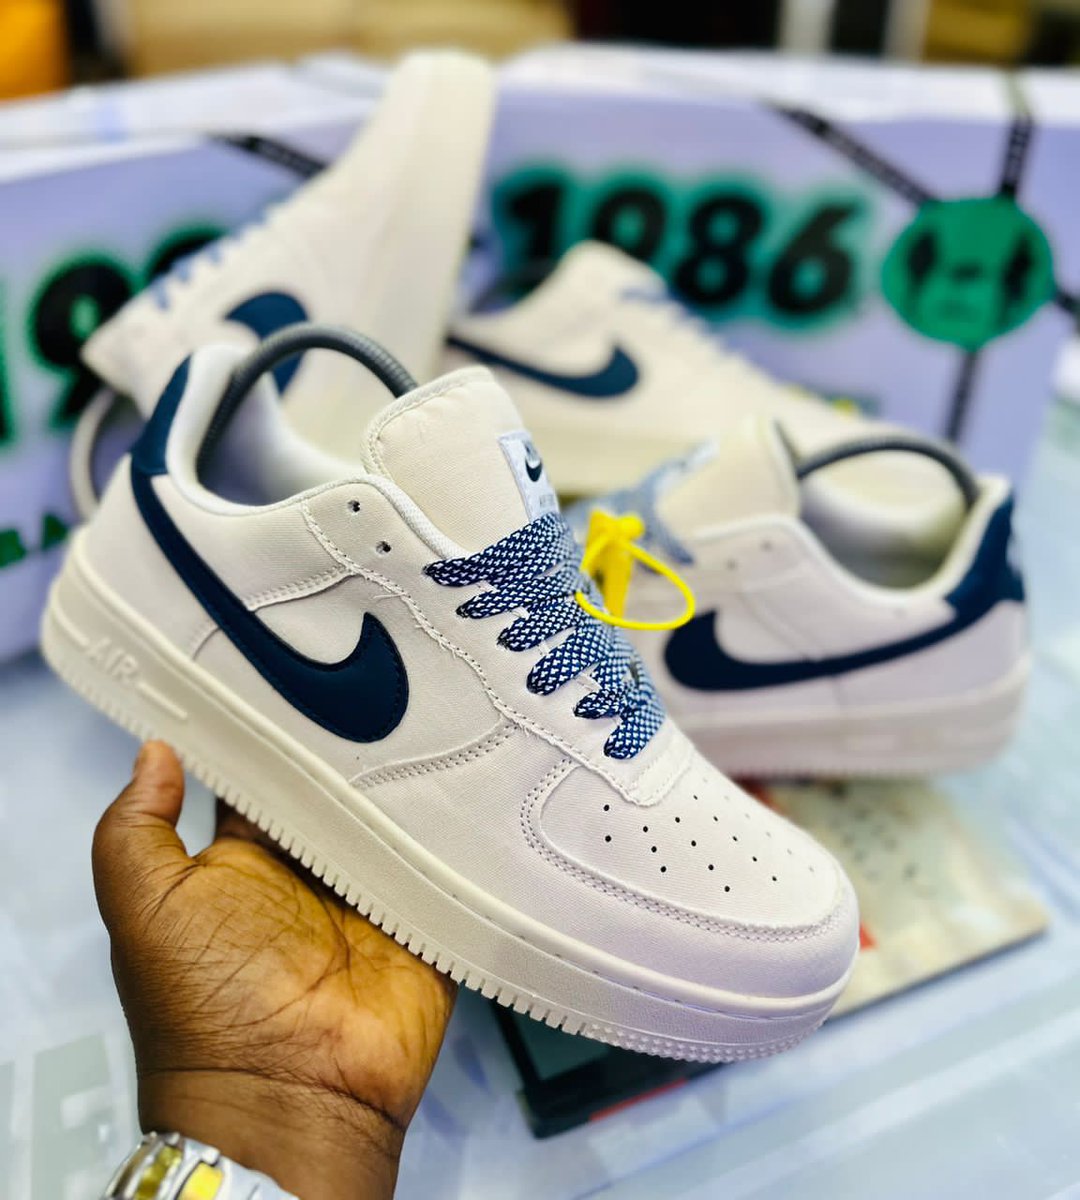 *STOCK: NIKE AIRFORCE1 DOUBLE SOLE SNEAKERS*

*SIZES: 41, 42, 43, 44, 45, 46, 47*

*COLOR: Available as seen* 

*PRICE: 21,000*

*FULLY BOXED*